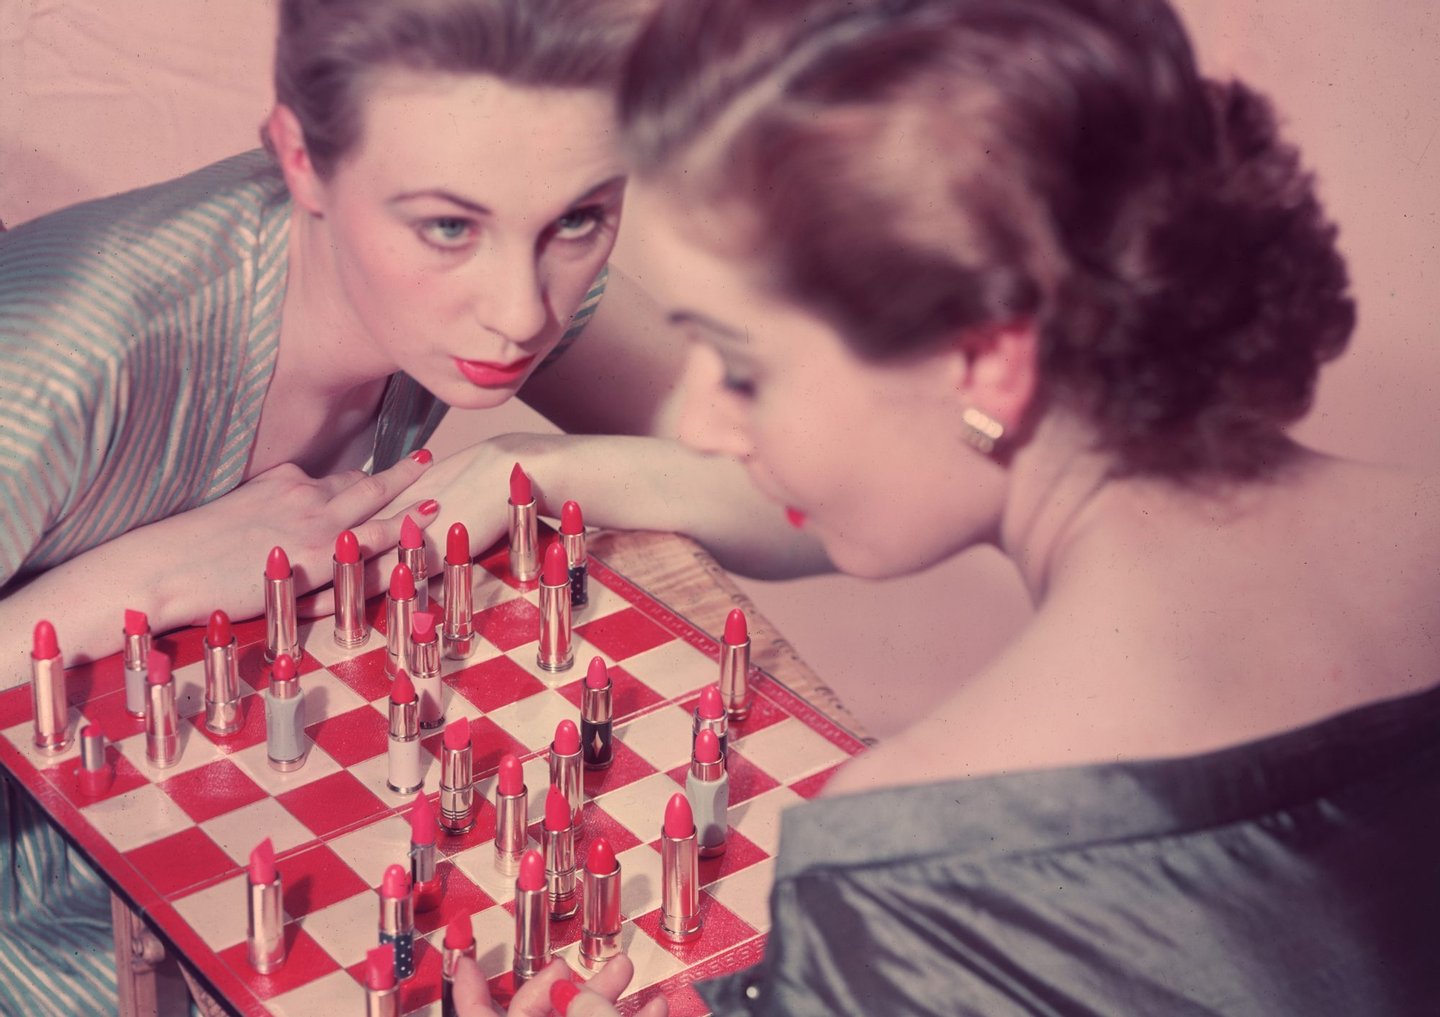 circa 1955: Two women playing an unusual game of chess, with lipstick instead of chess pieces. (Photo by Chaloner Woods/Getty Images)